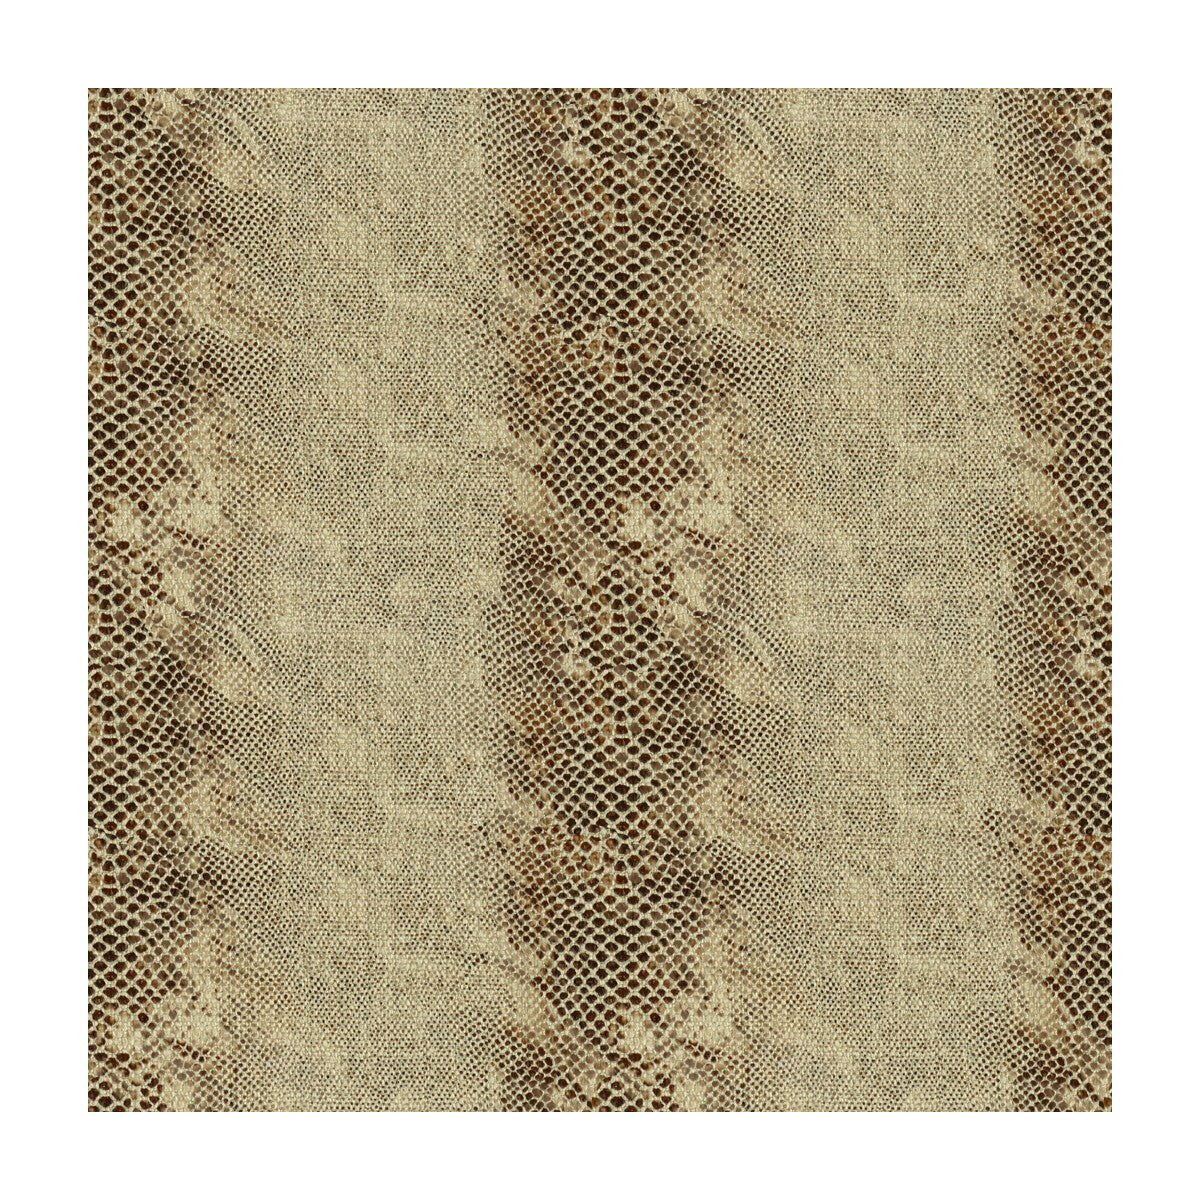 Lux Lizard fabric in ganache color - pattern LUX LIZARD.616.0 - by Kravet Couture in the Modern Luxe collection